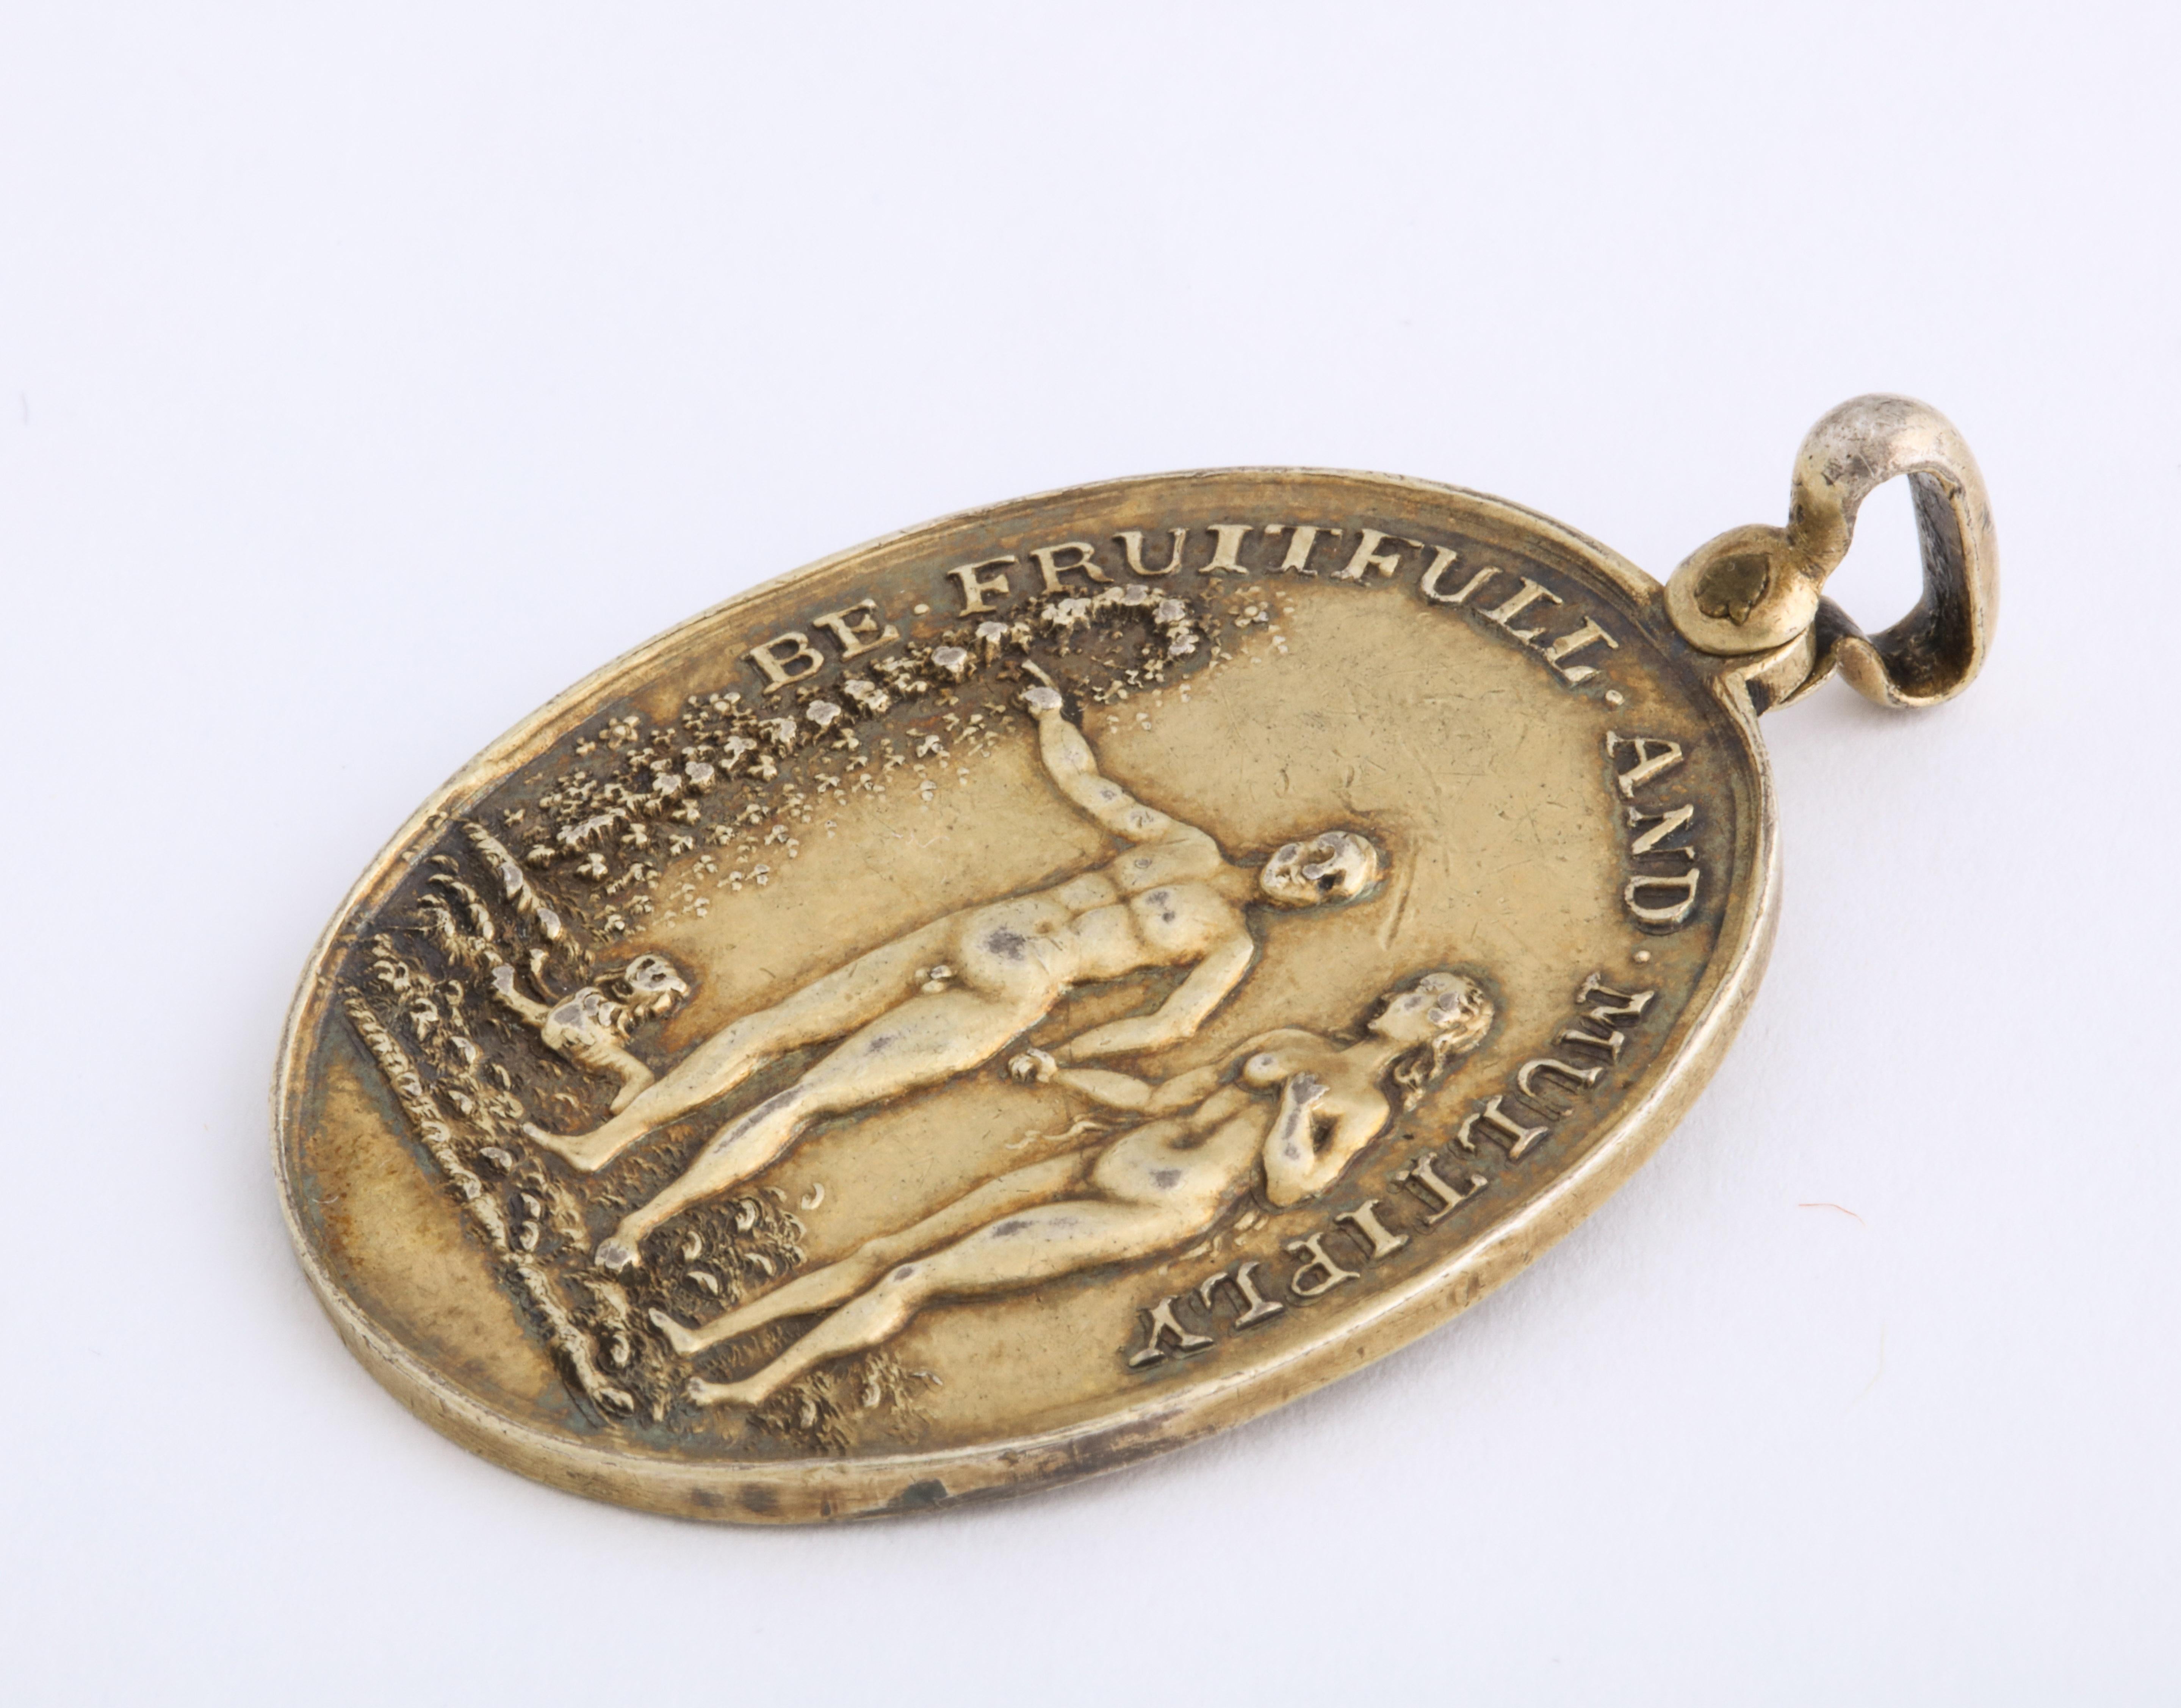 On the face of this 18th century Scottish token is the motto, 